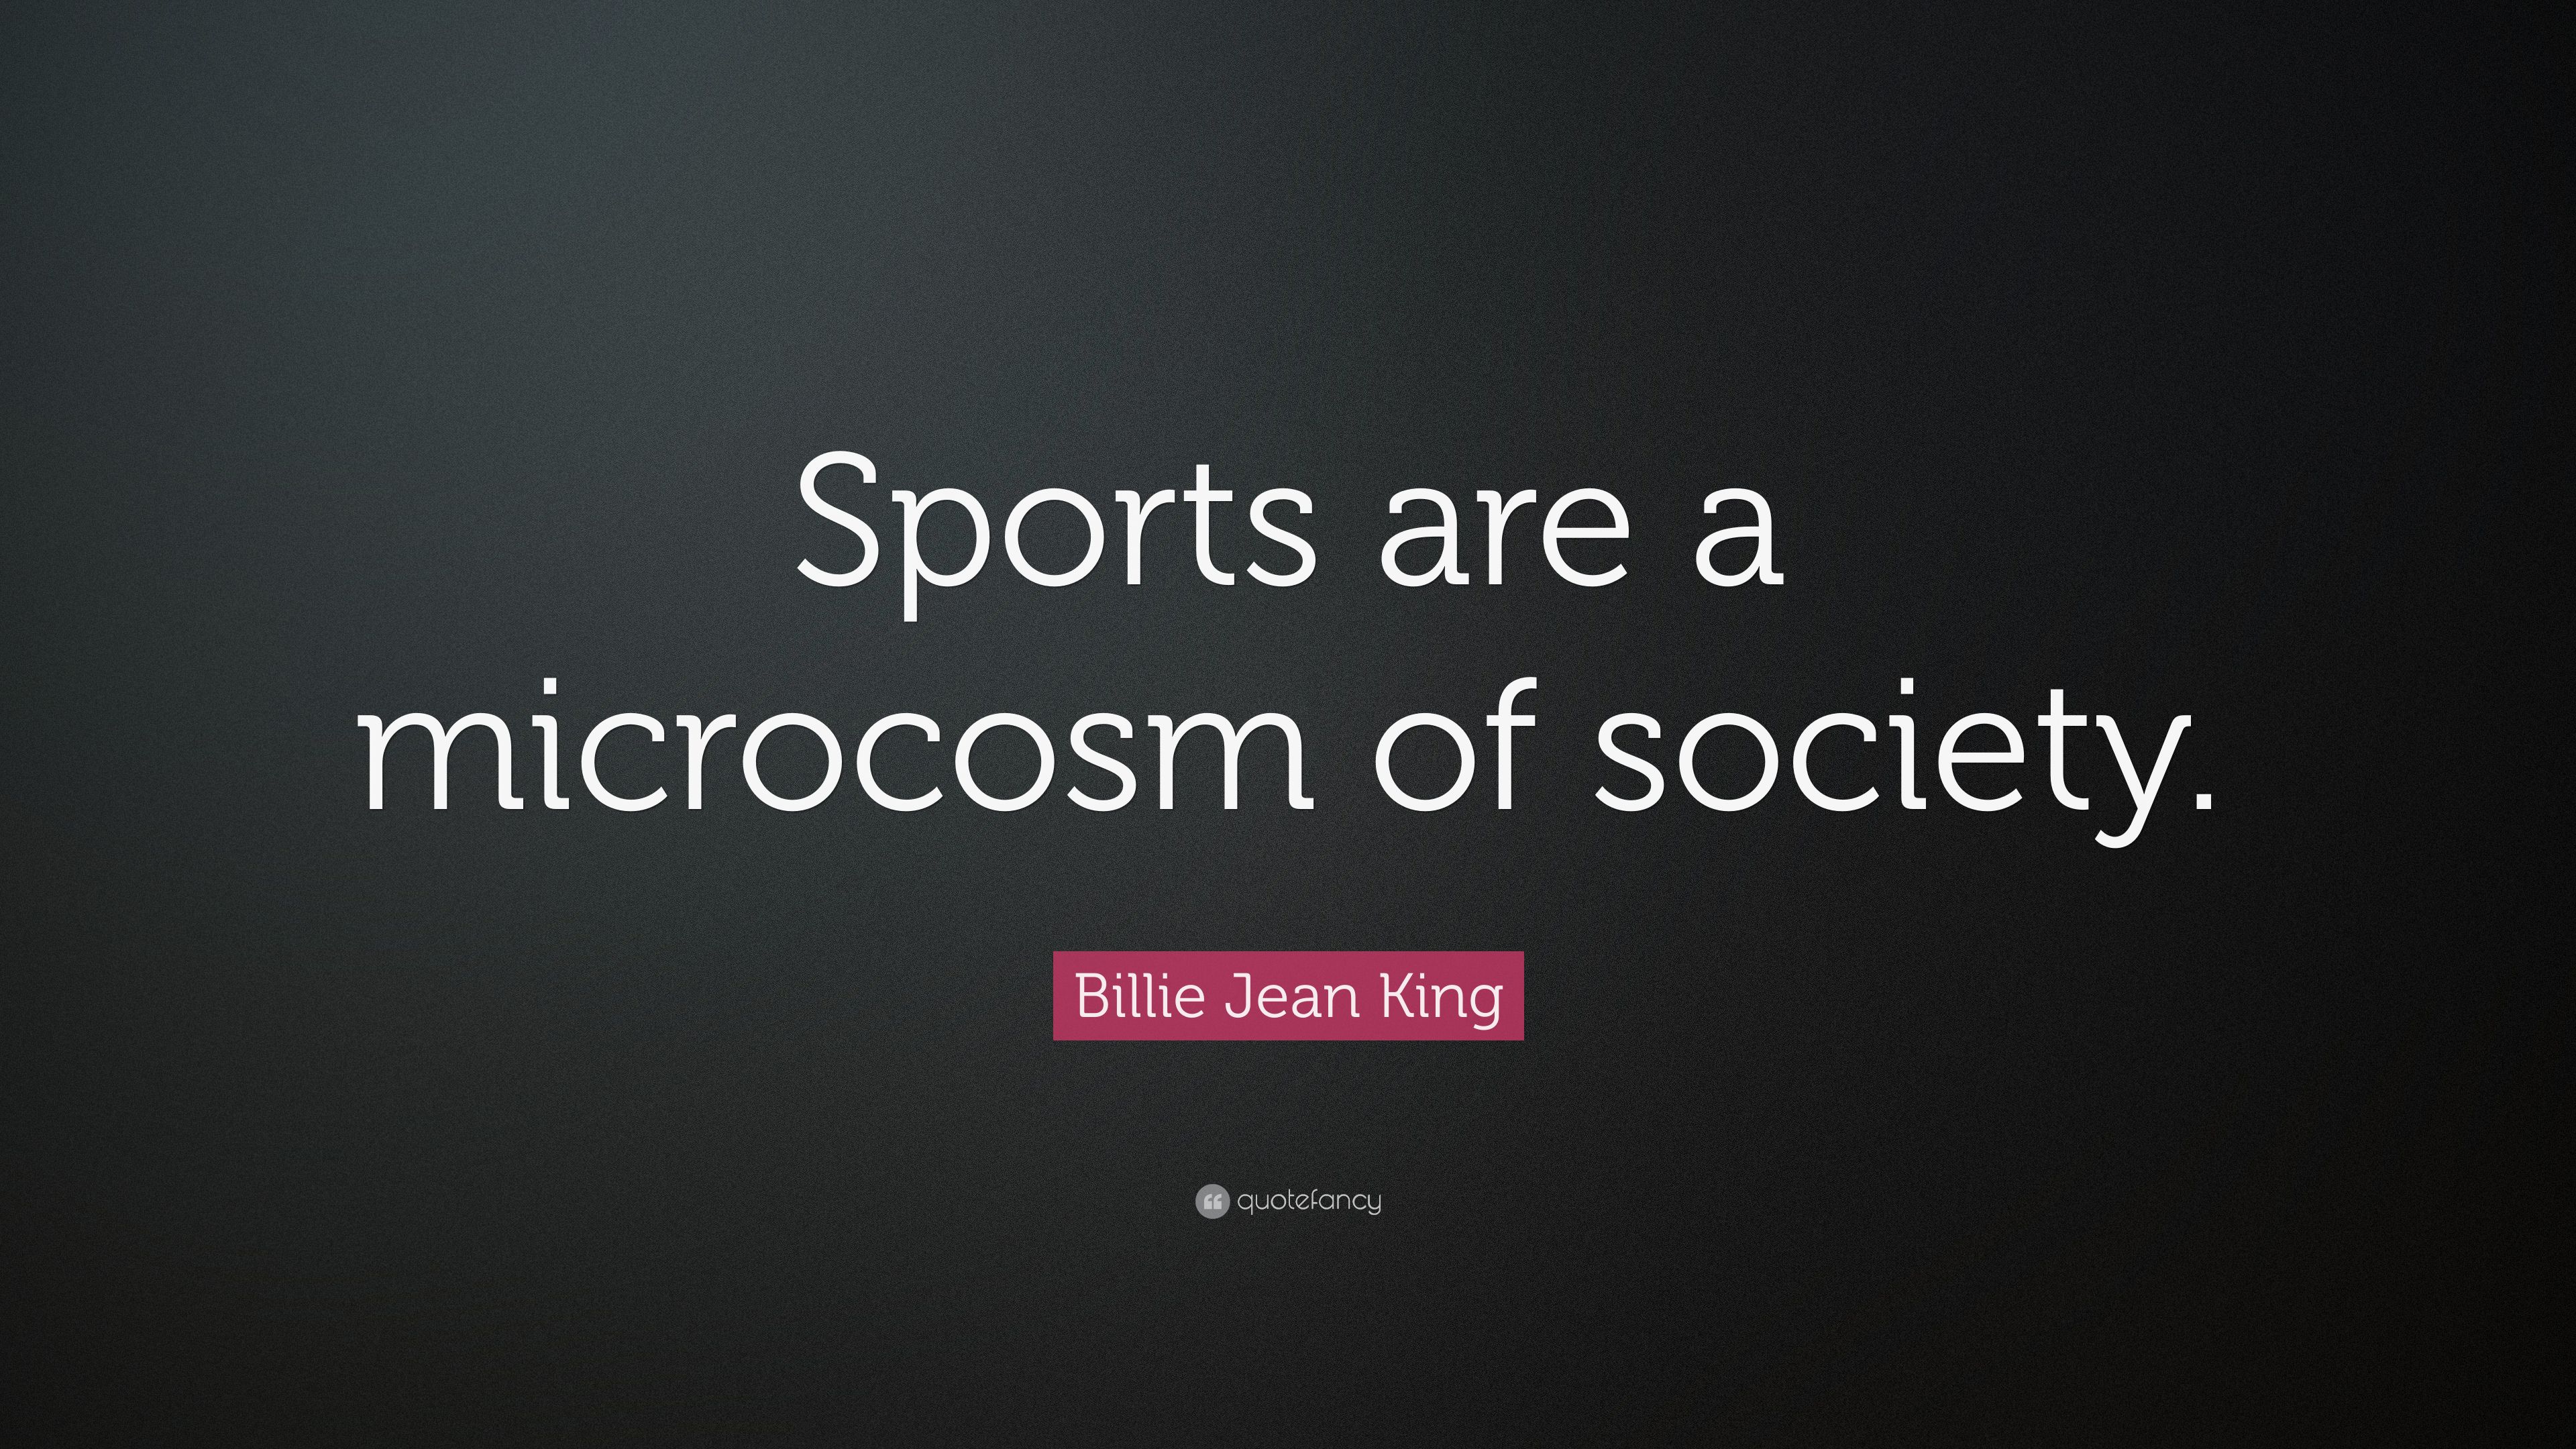 Billie Jean King Quote: “Sports are a microcosm of society.” 7